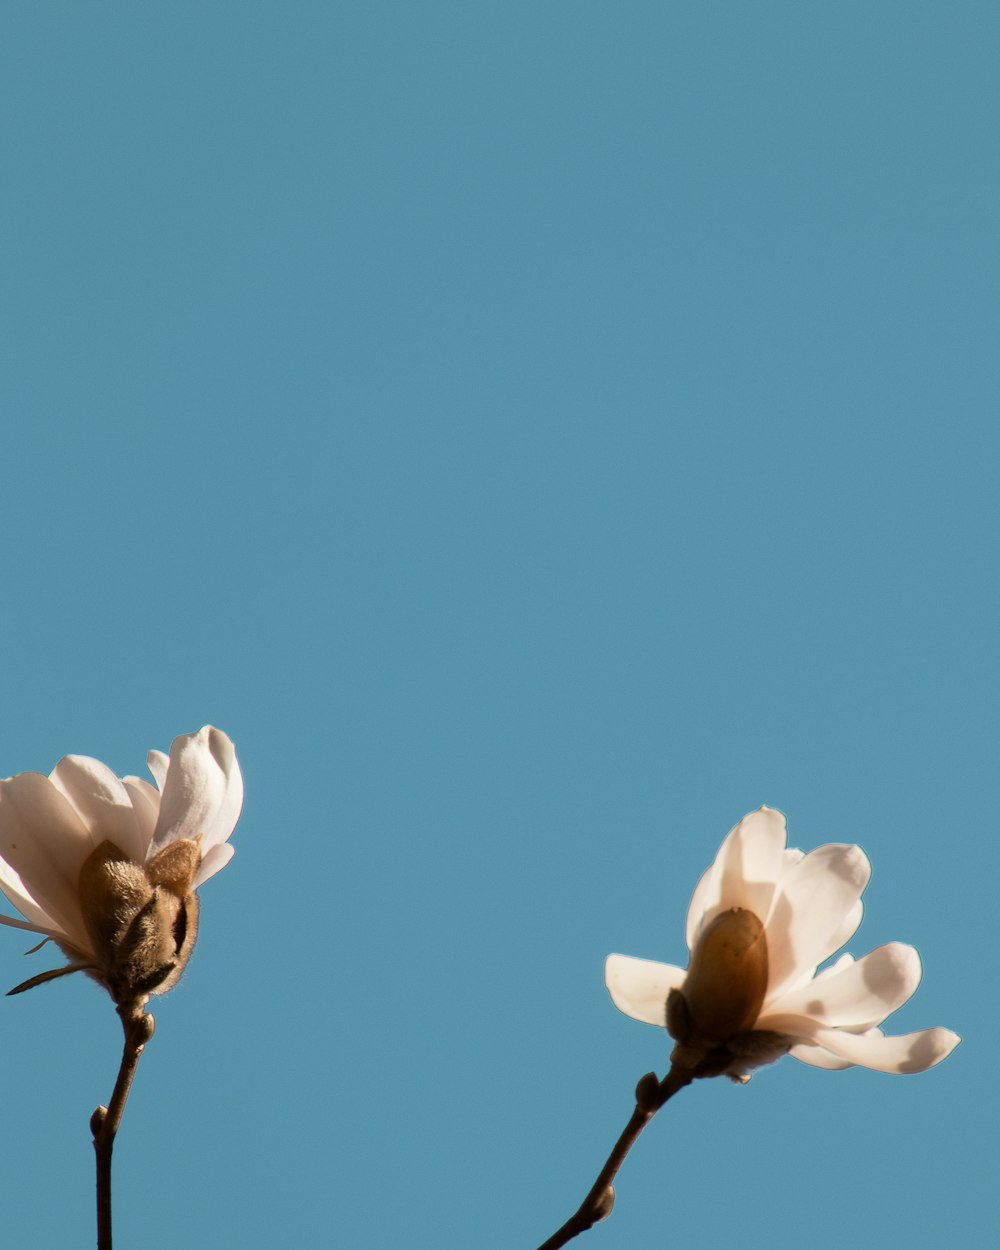 two white flowers with a blue sky in the background